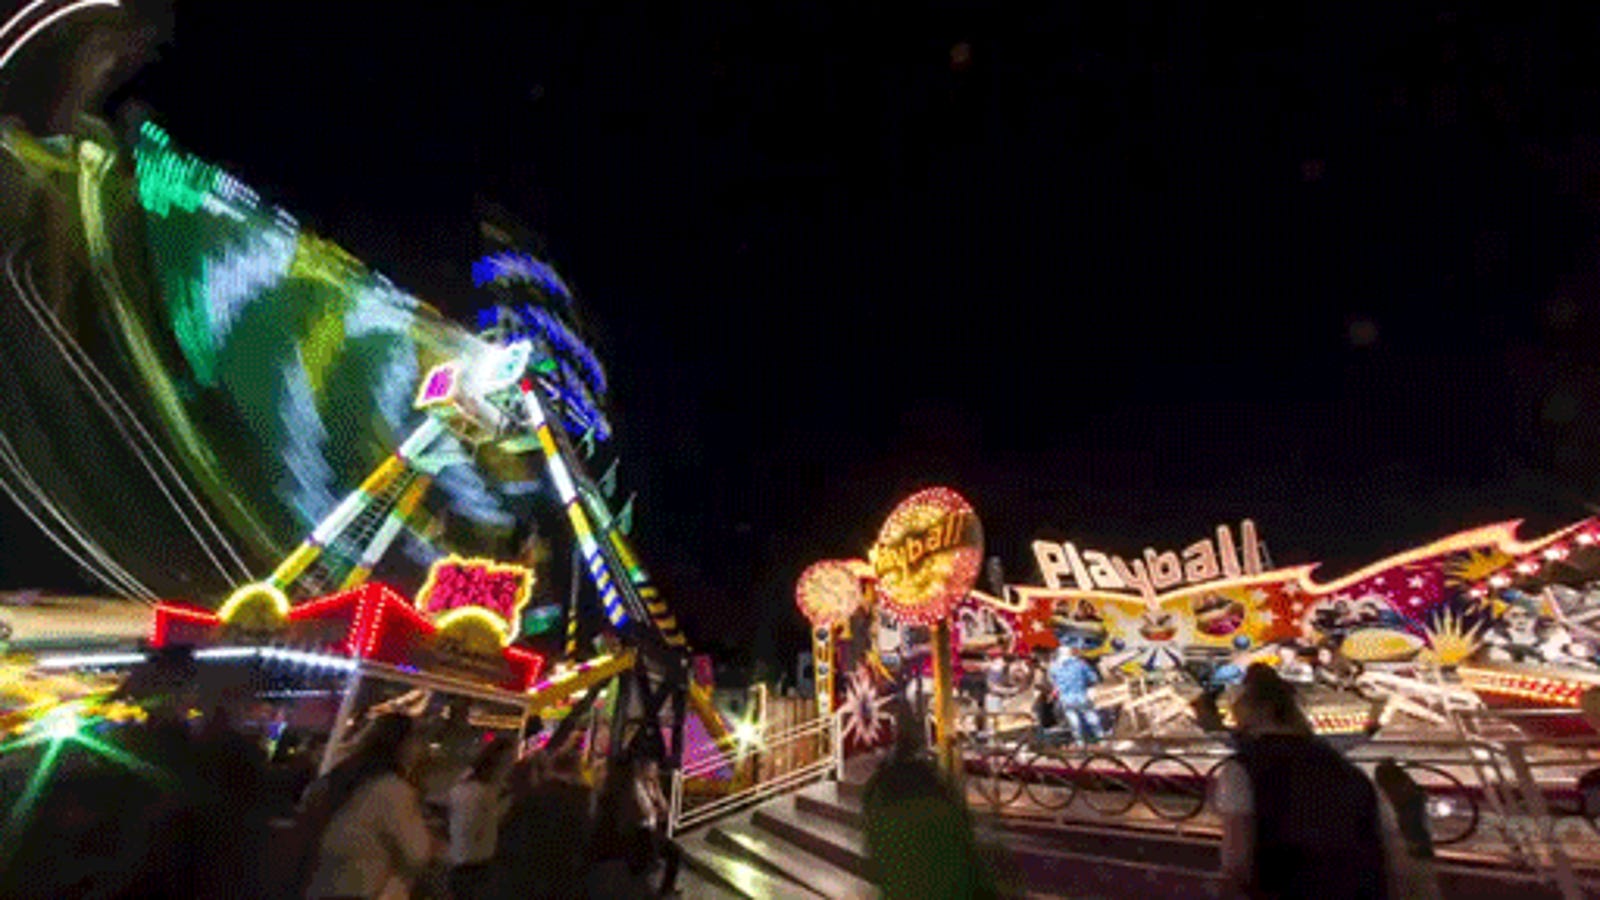 Time-lapse shows how it feels to be drunk at the local fair